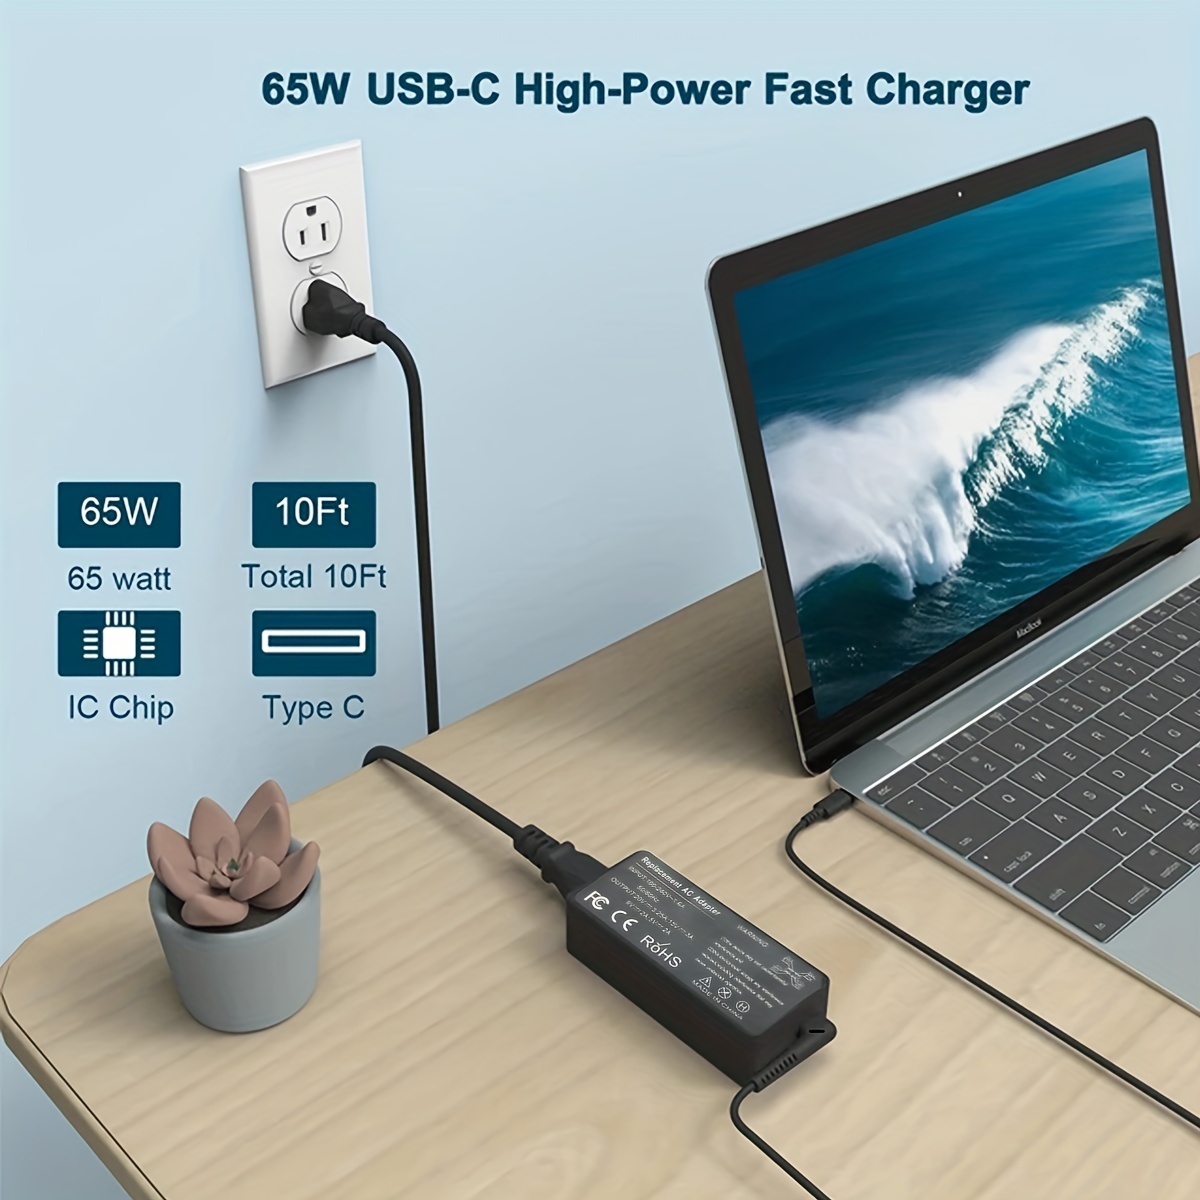 Original Huawei MateBook 65W USB-C Type C Charger Adapter - Detachable  Cable